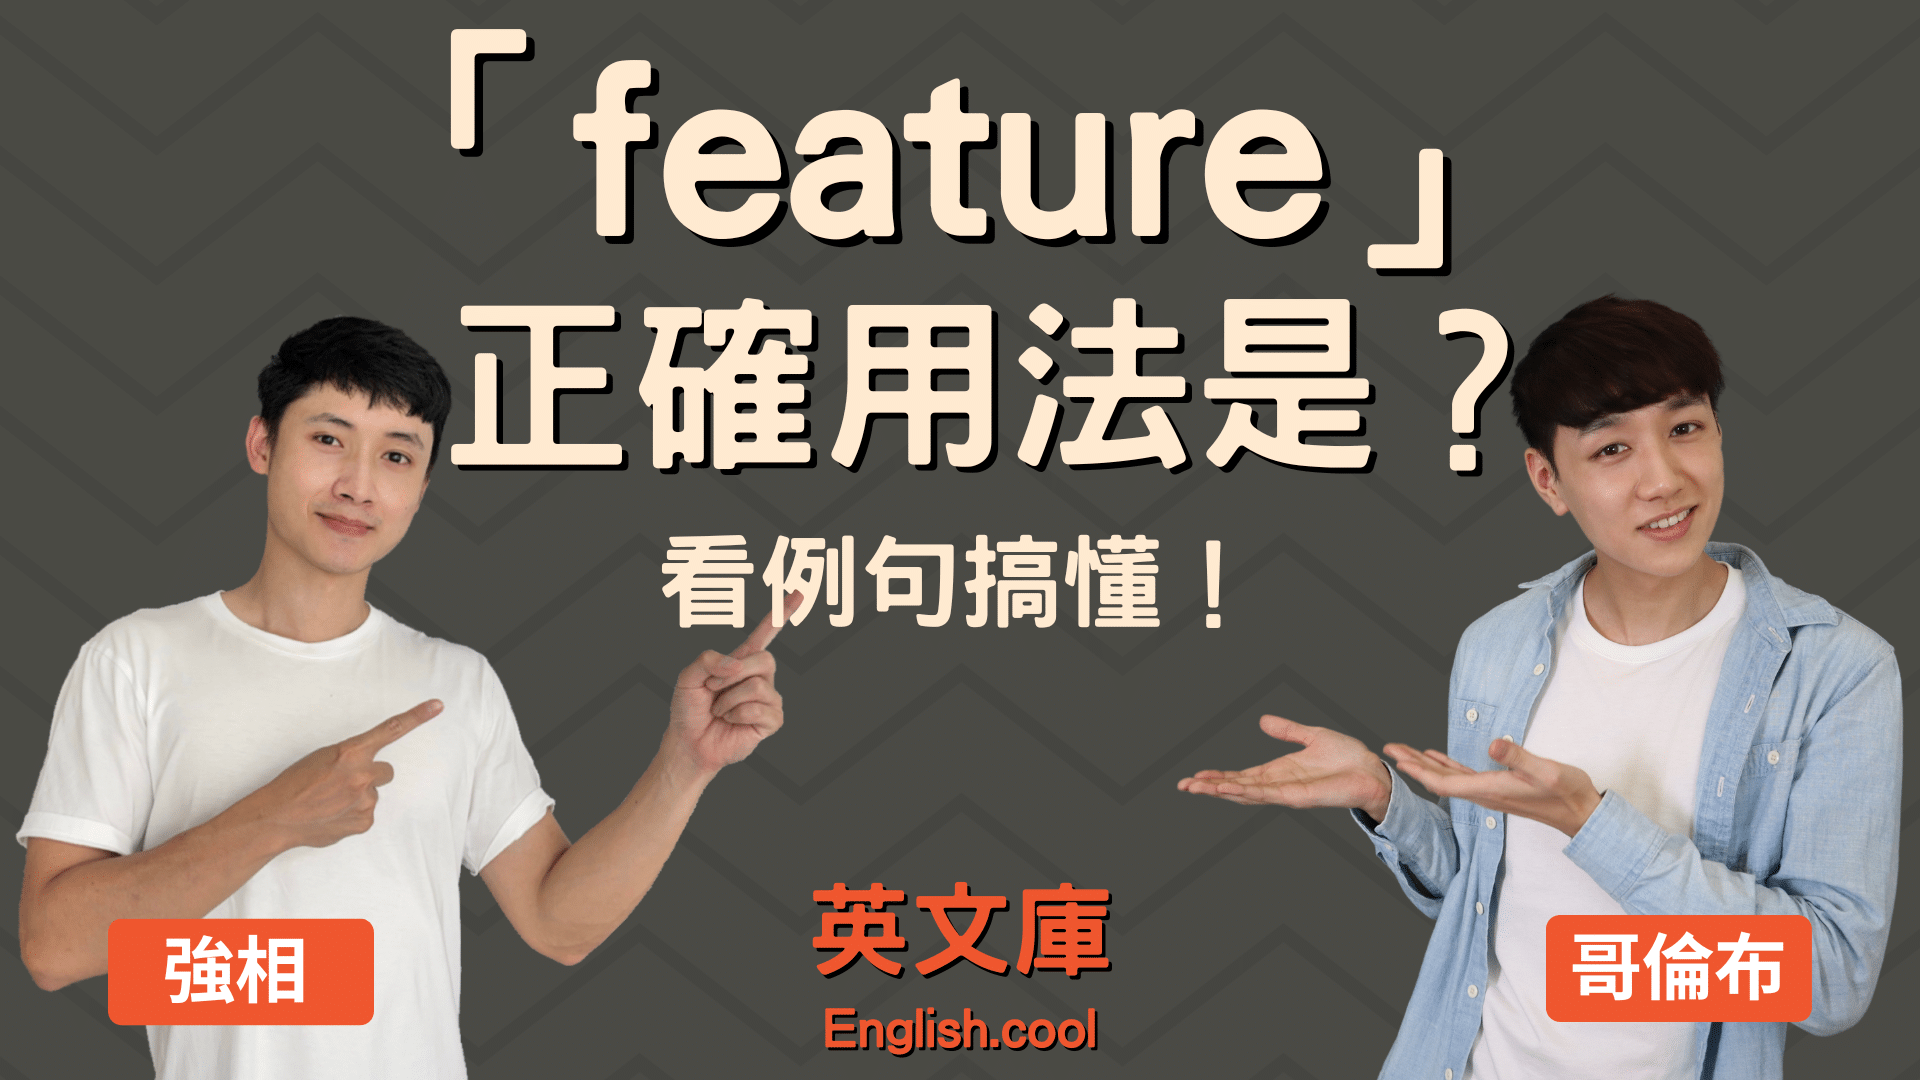 You are currently viewing 「feature」正確用法是？來看例句搞懂！